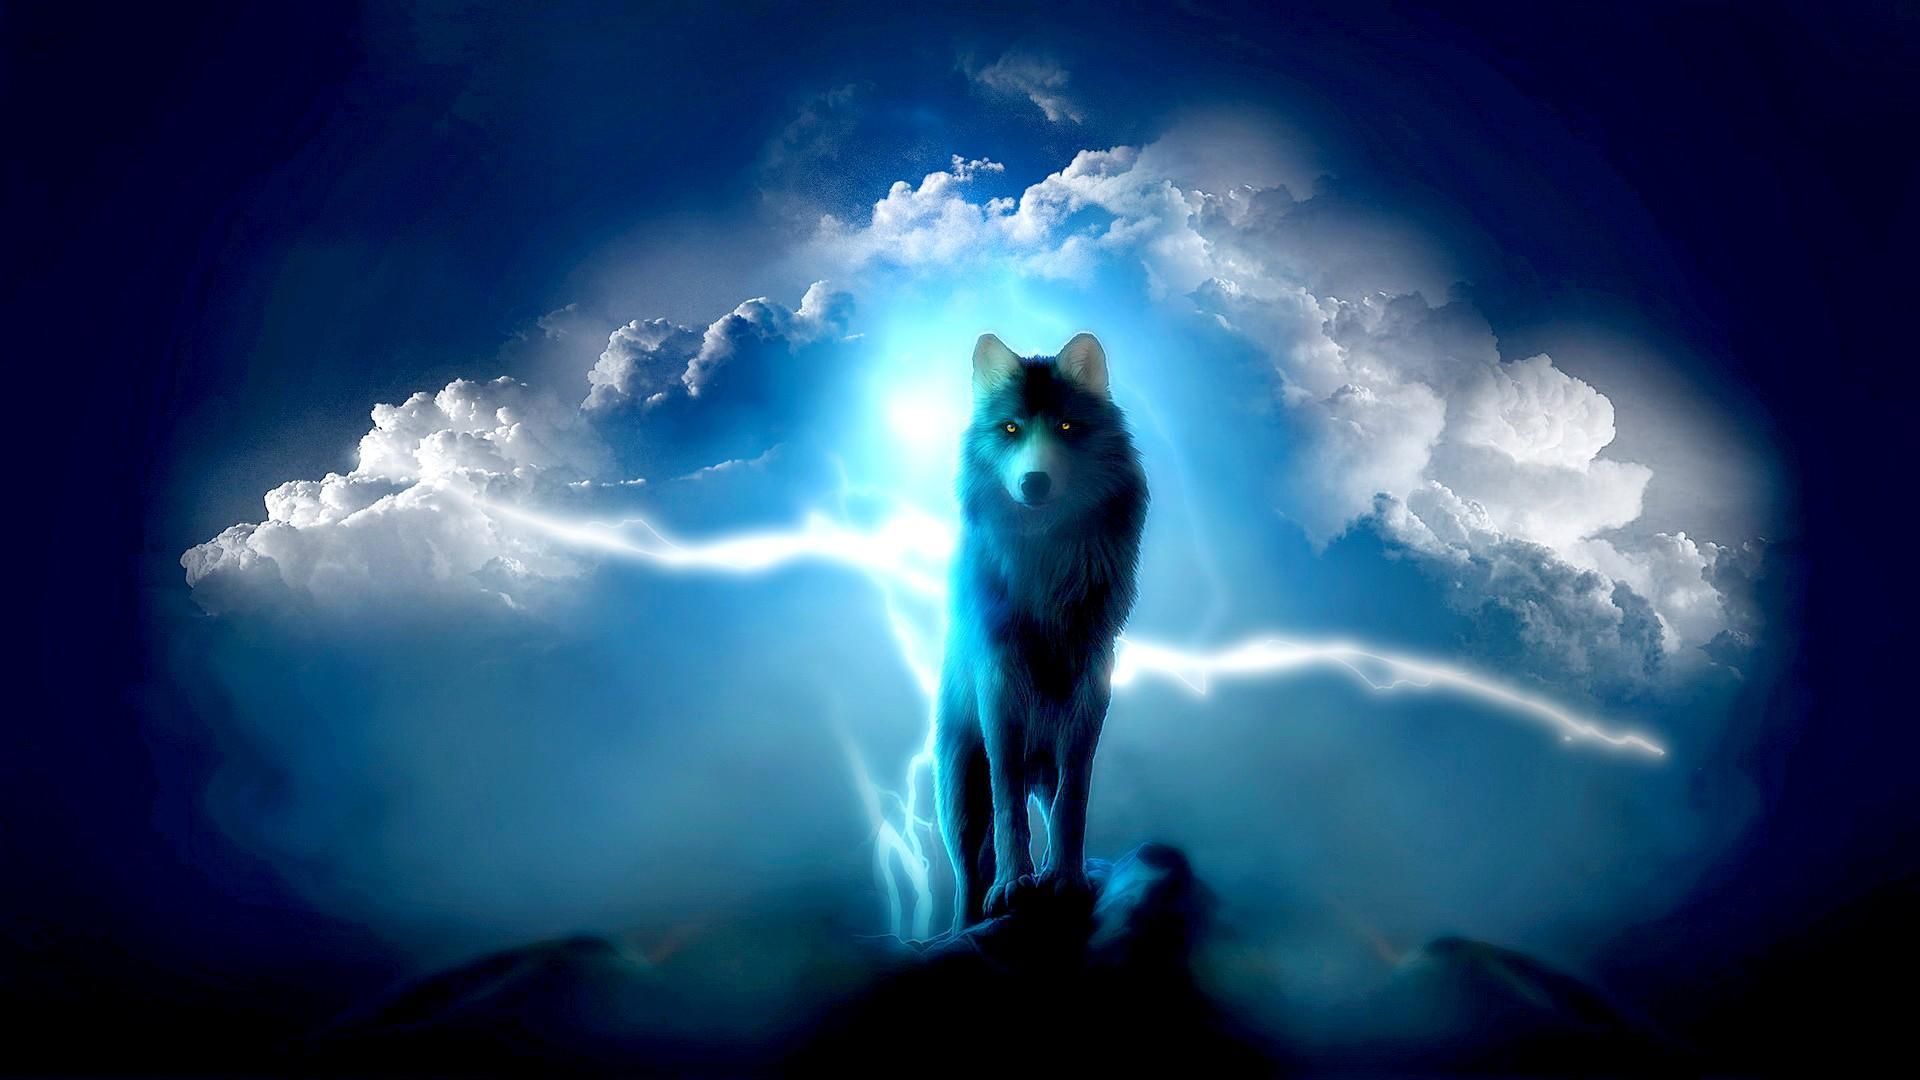 Blue Wolf Wallpapers - Wallpaper Cave